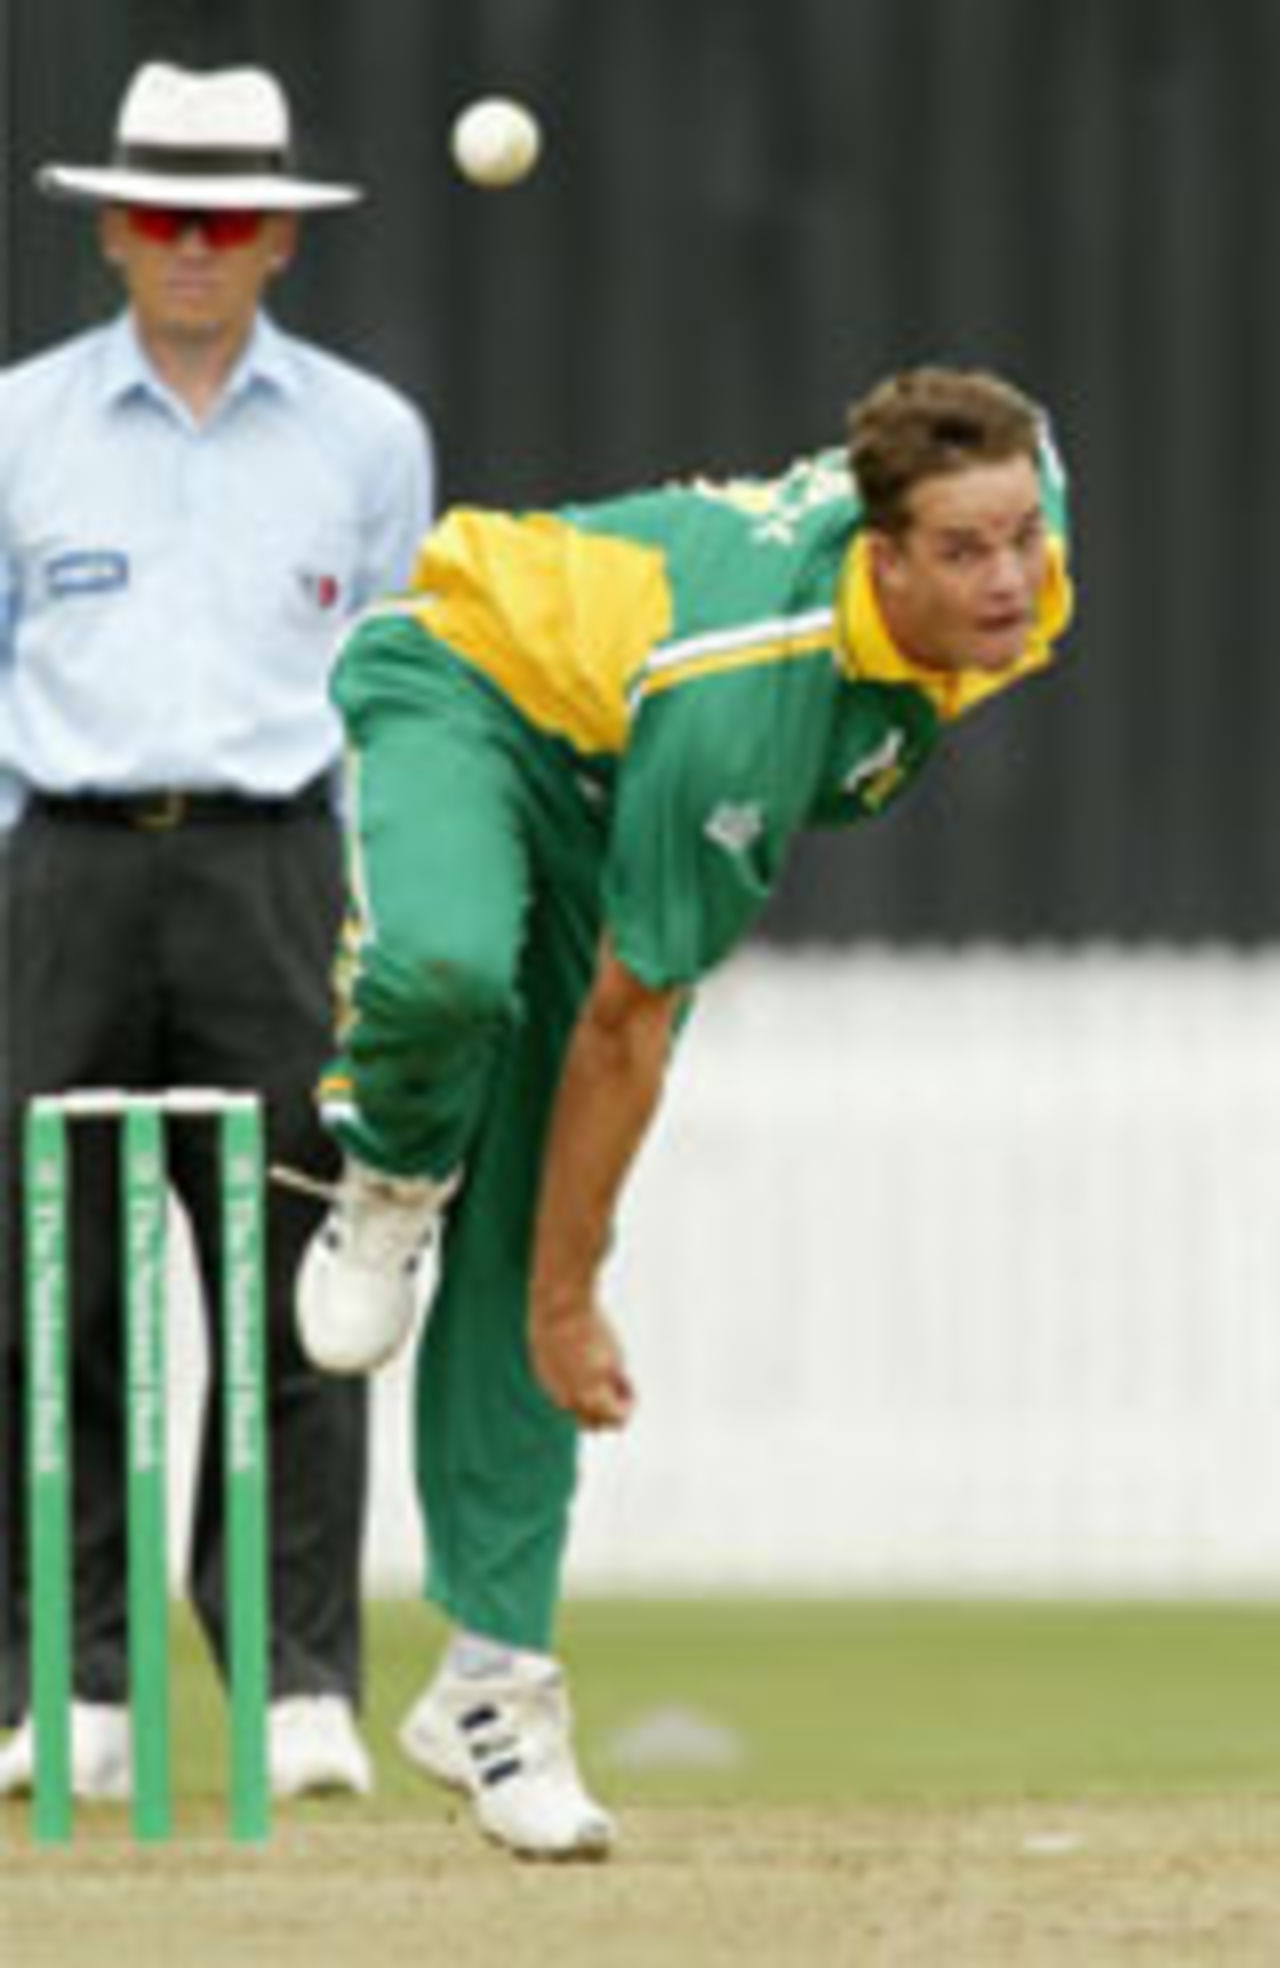 Albie Morke bowling, Northern Districts v South Africans, Westpac Stadium February 11, 2004